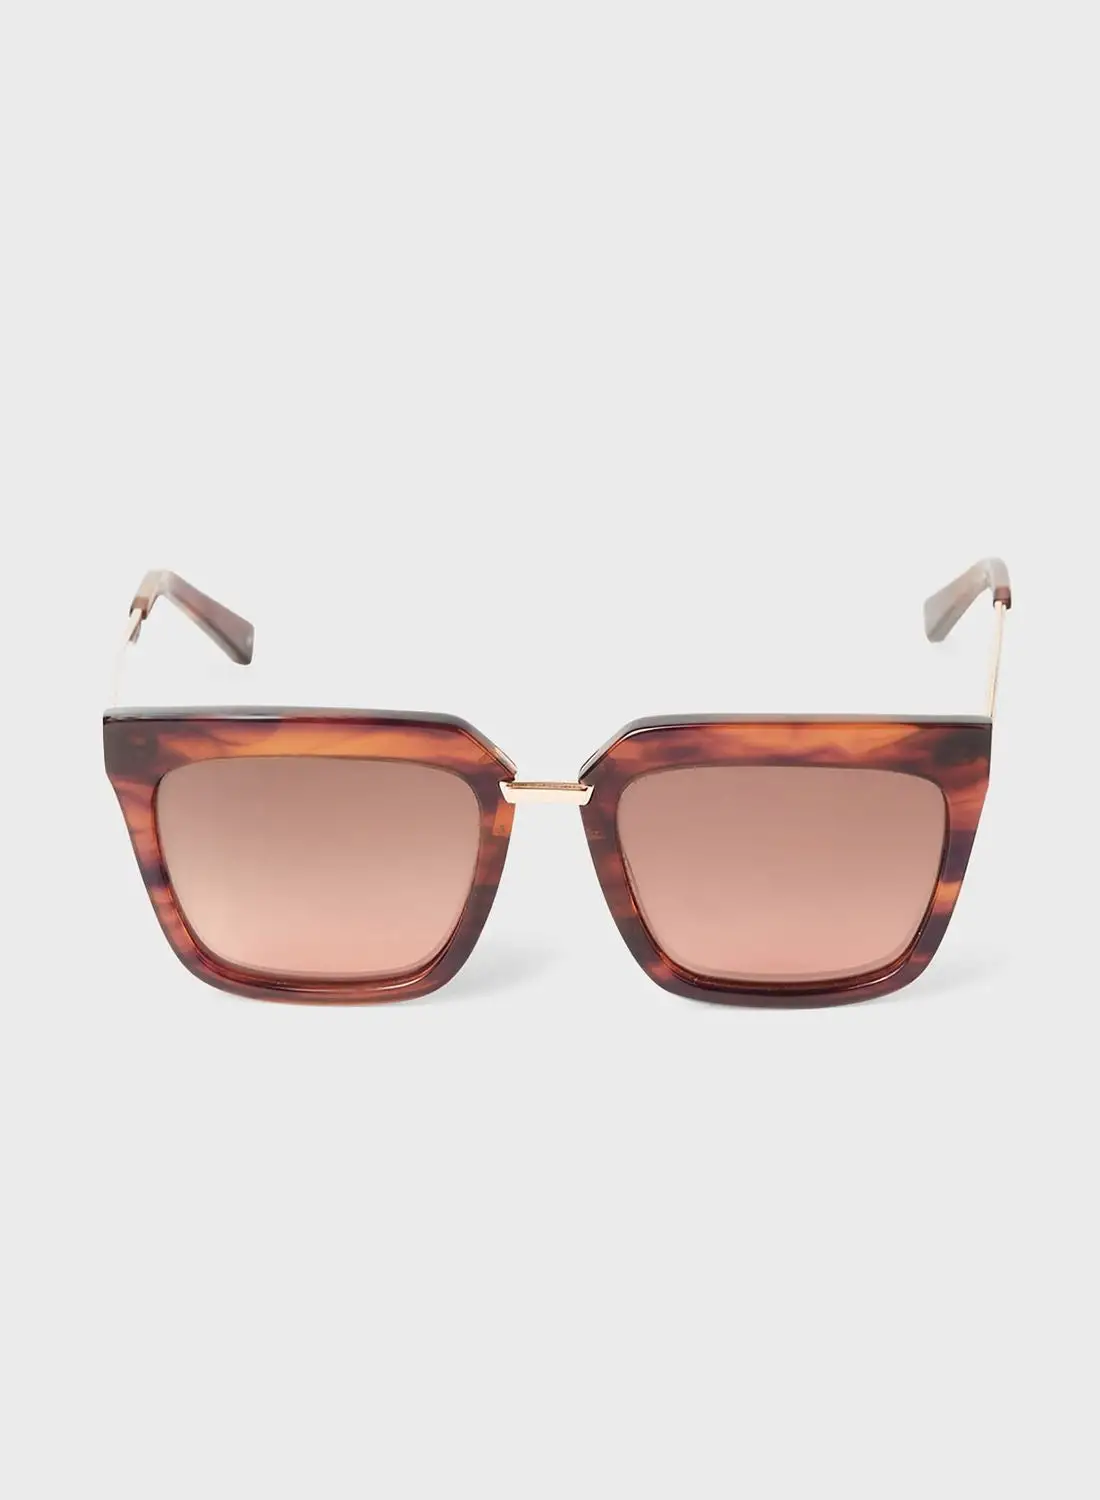 KENDALL + KYLIE Oversized Square Sunglasses